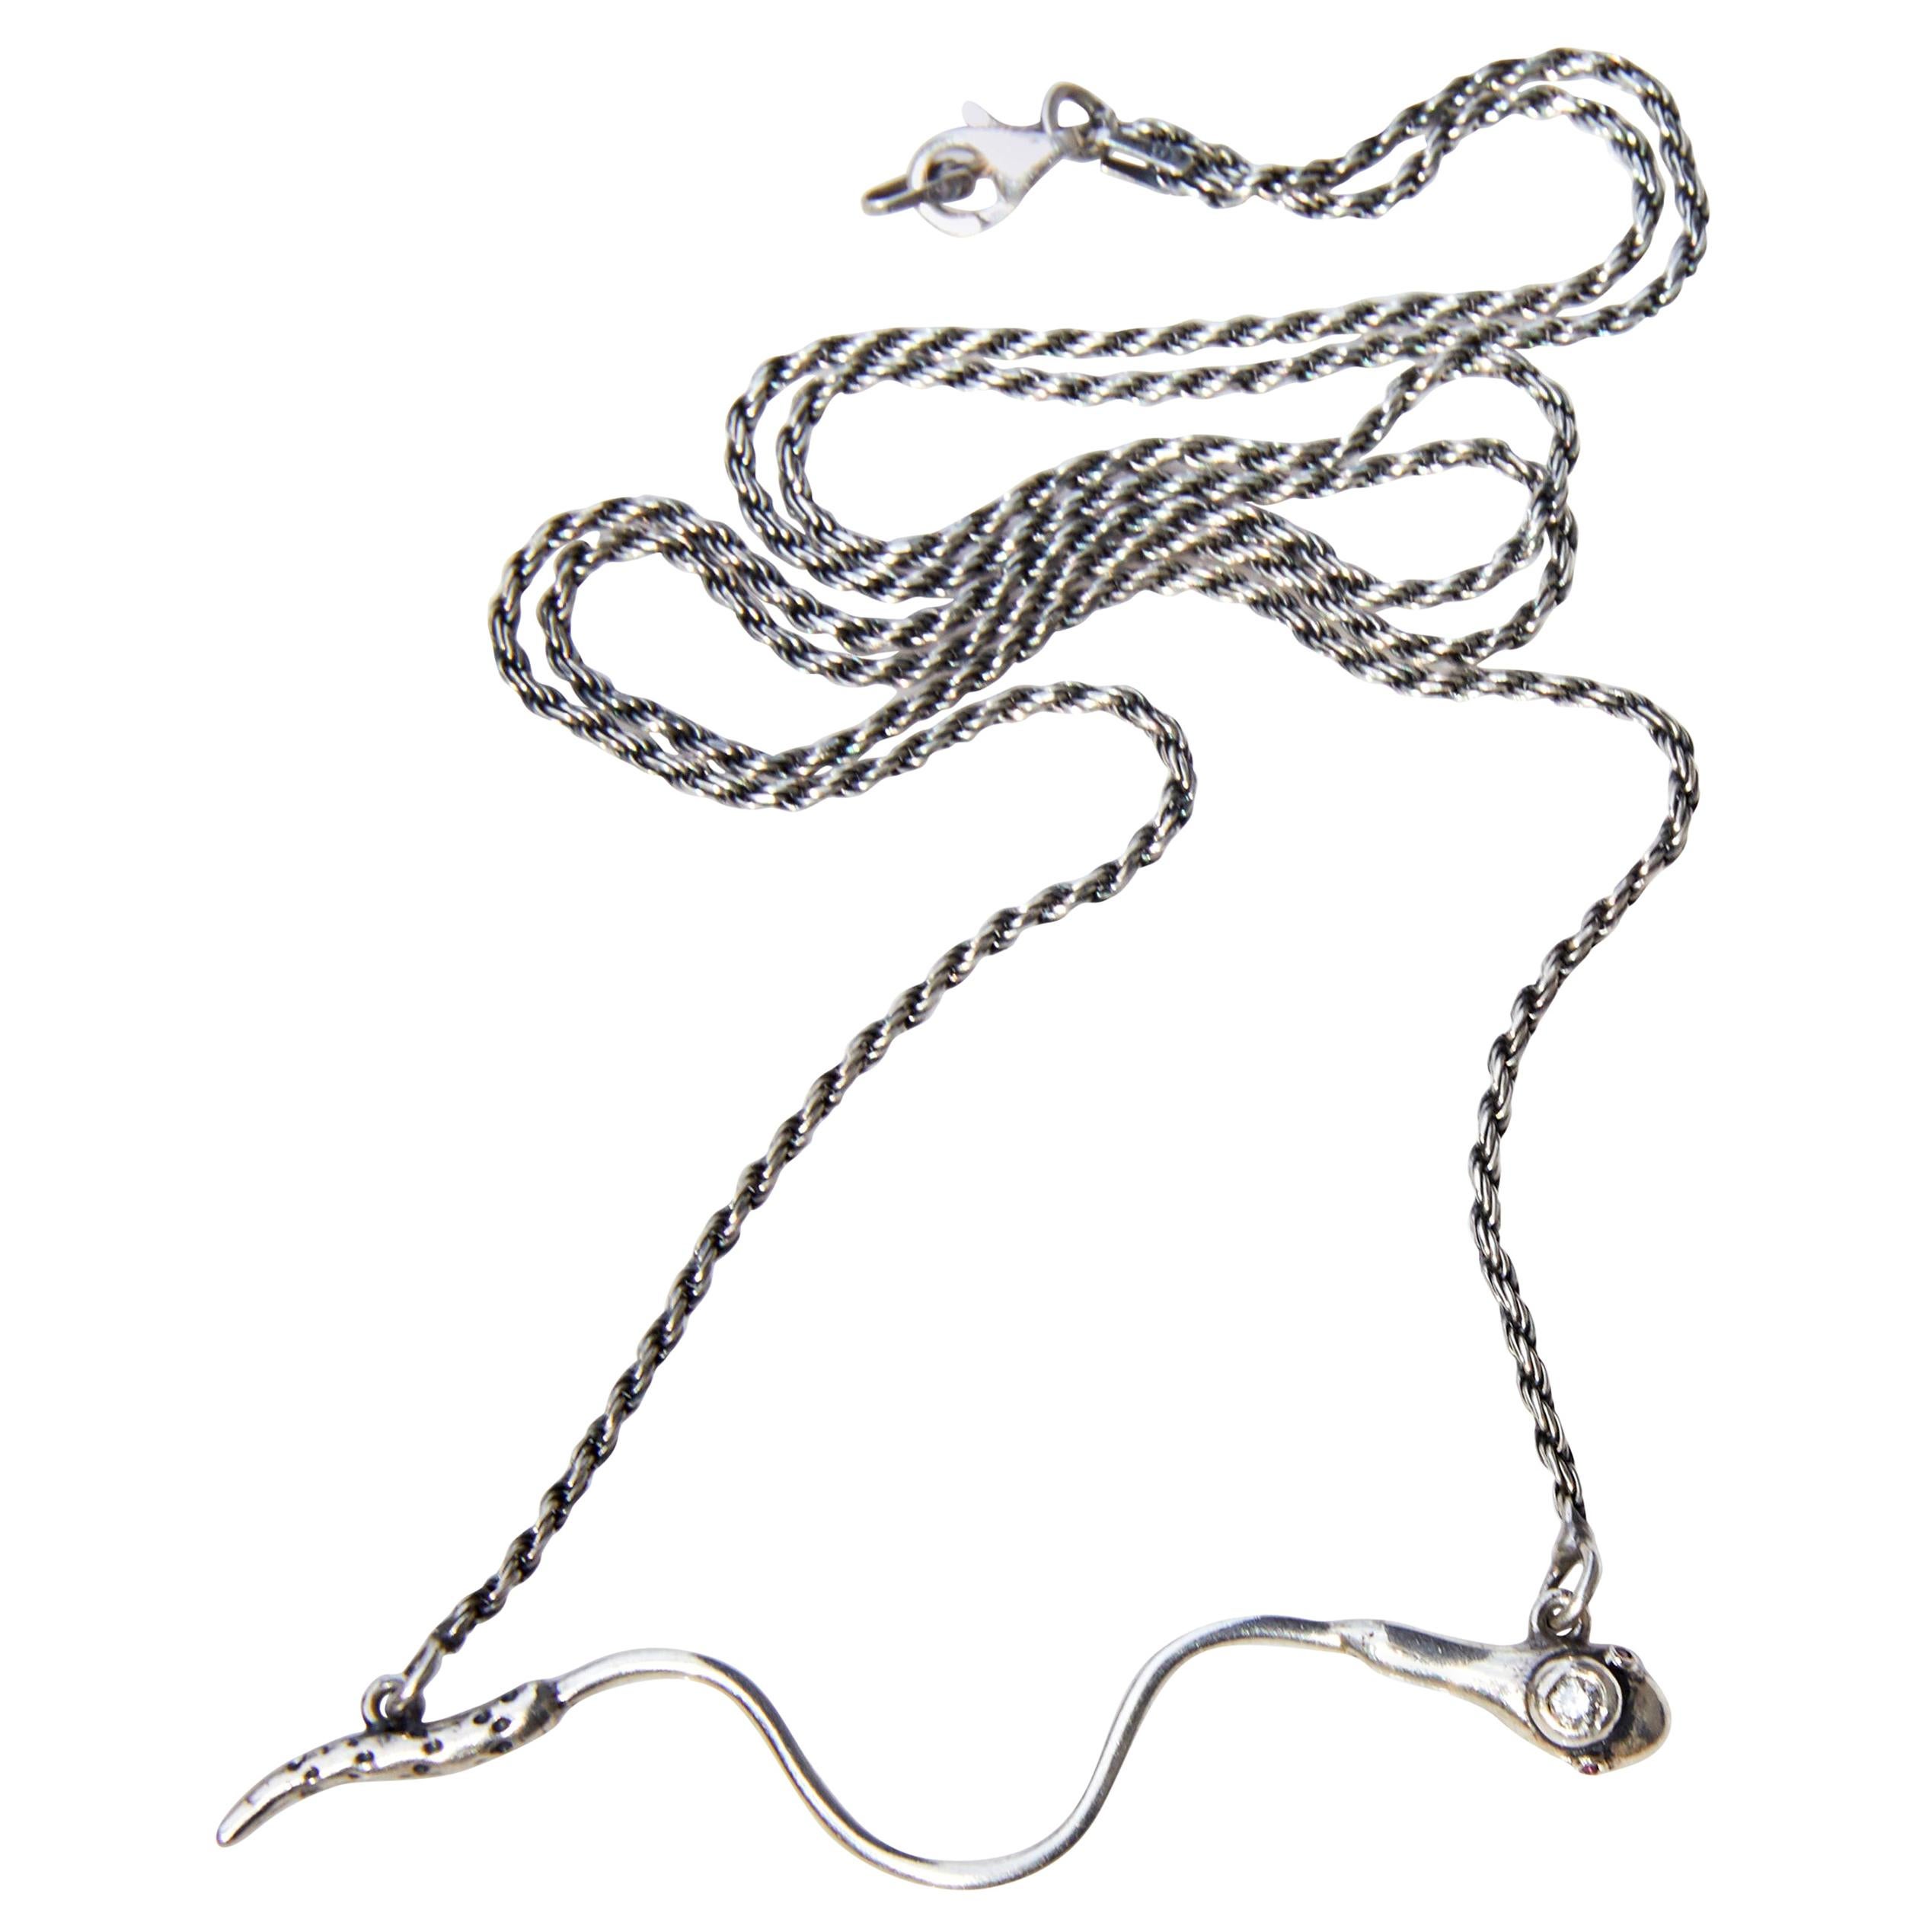 White Diamond Ruby Snake Necklace Italian Silver Chain J Dauphin For Sale